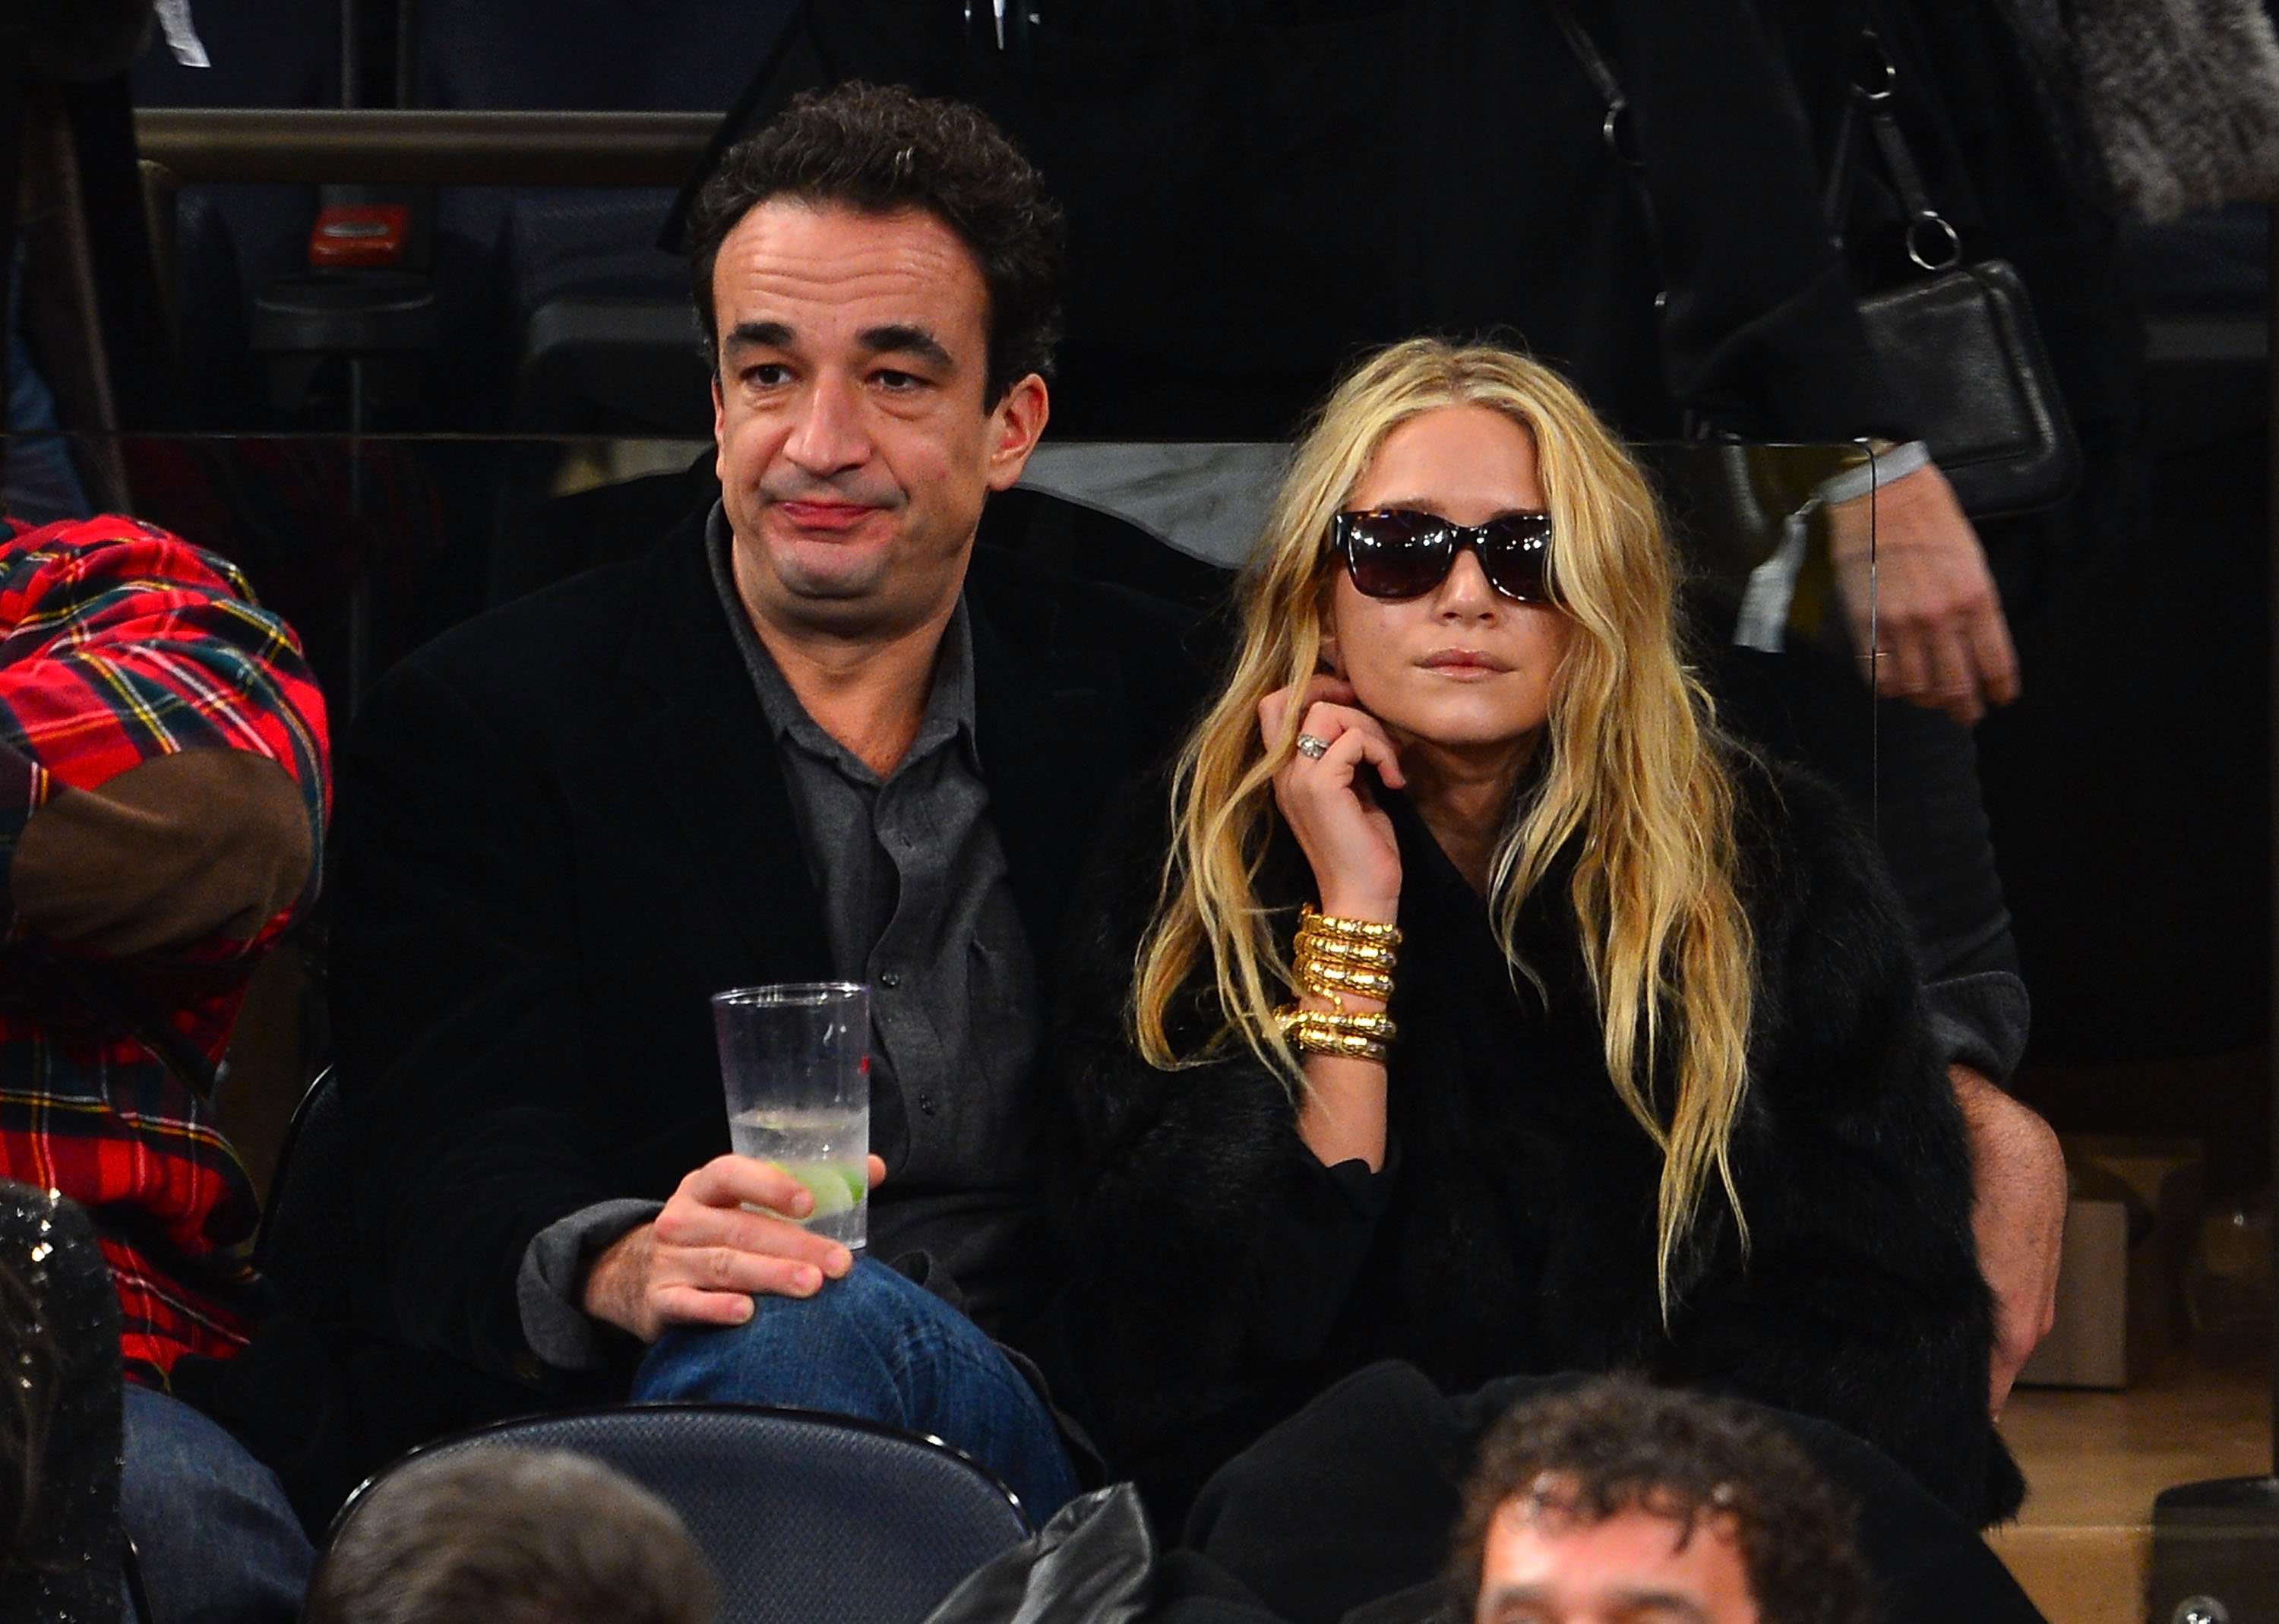 Olivier Sarkozy and Mary-Kate Olsen during the Cleveland Cavaliers vs New York Knicks game at Madison Square Garden on December 15, 2012 in New York City. / Source: Getty Images